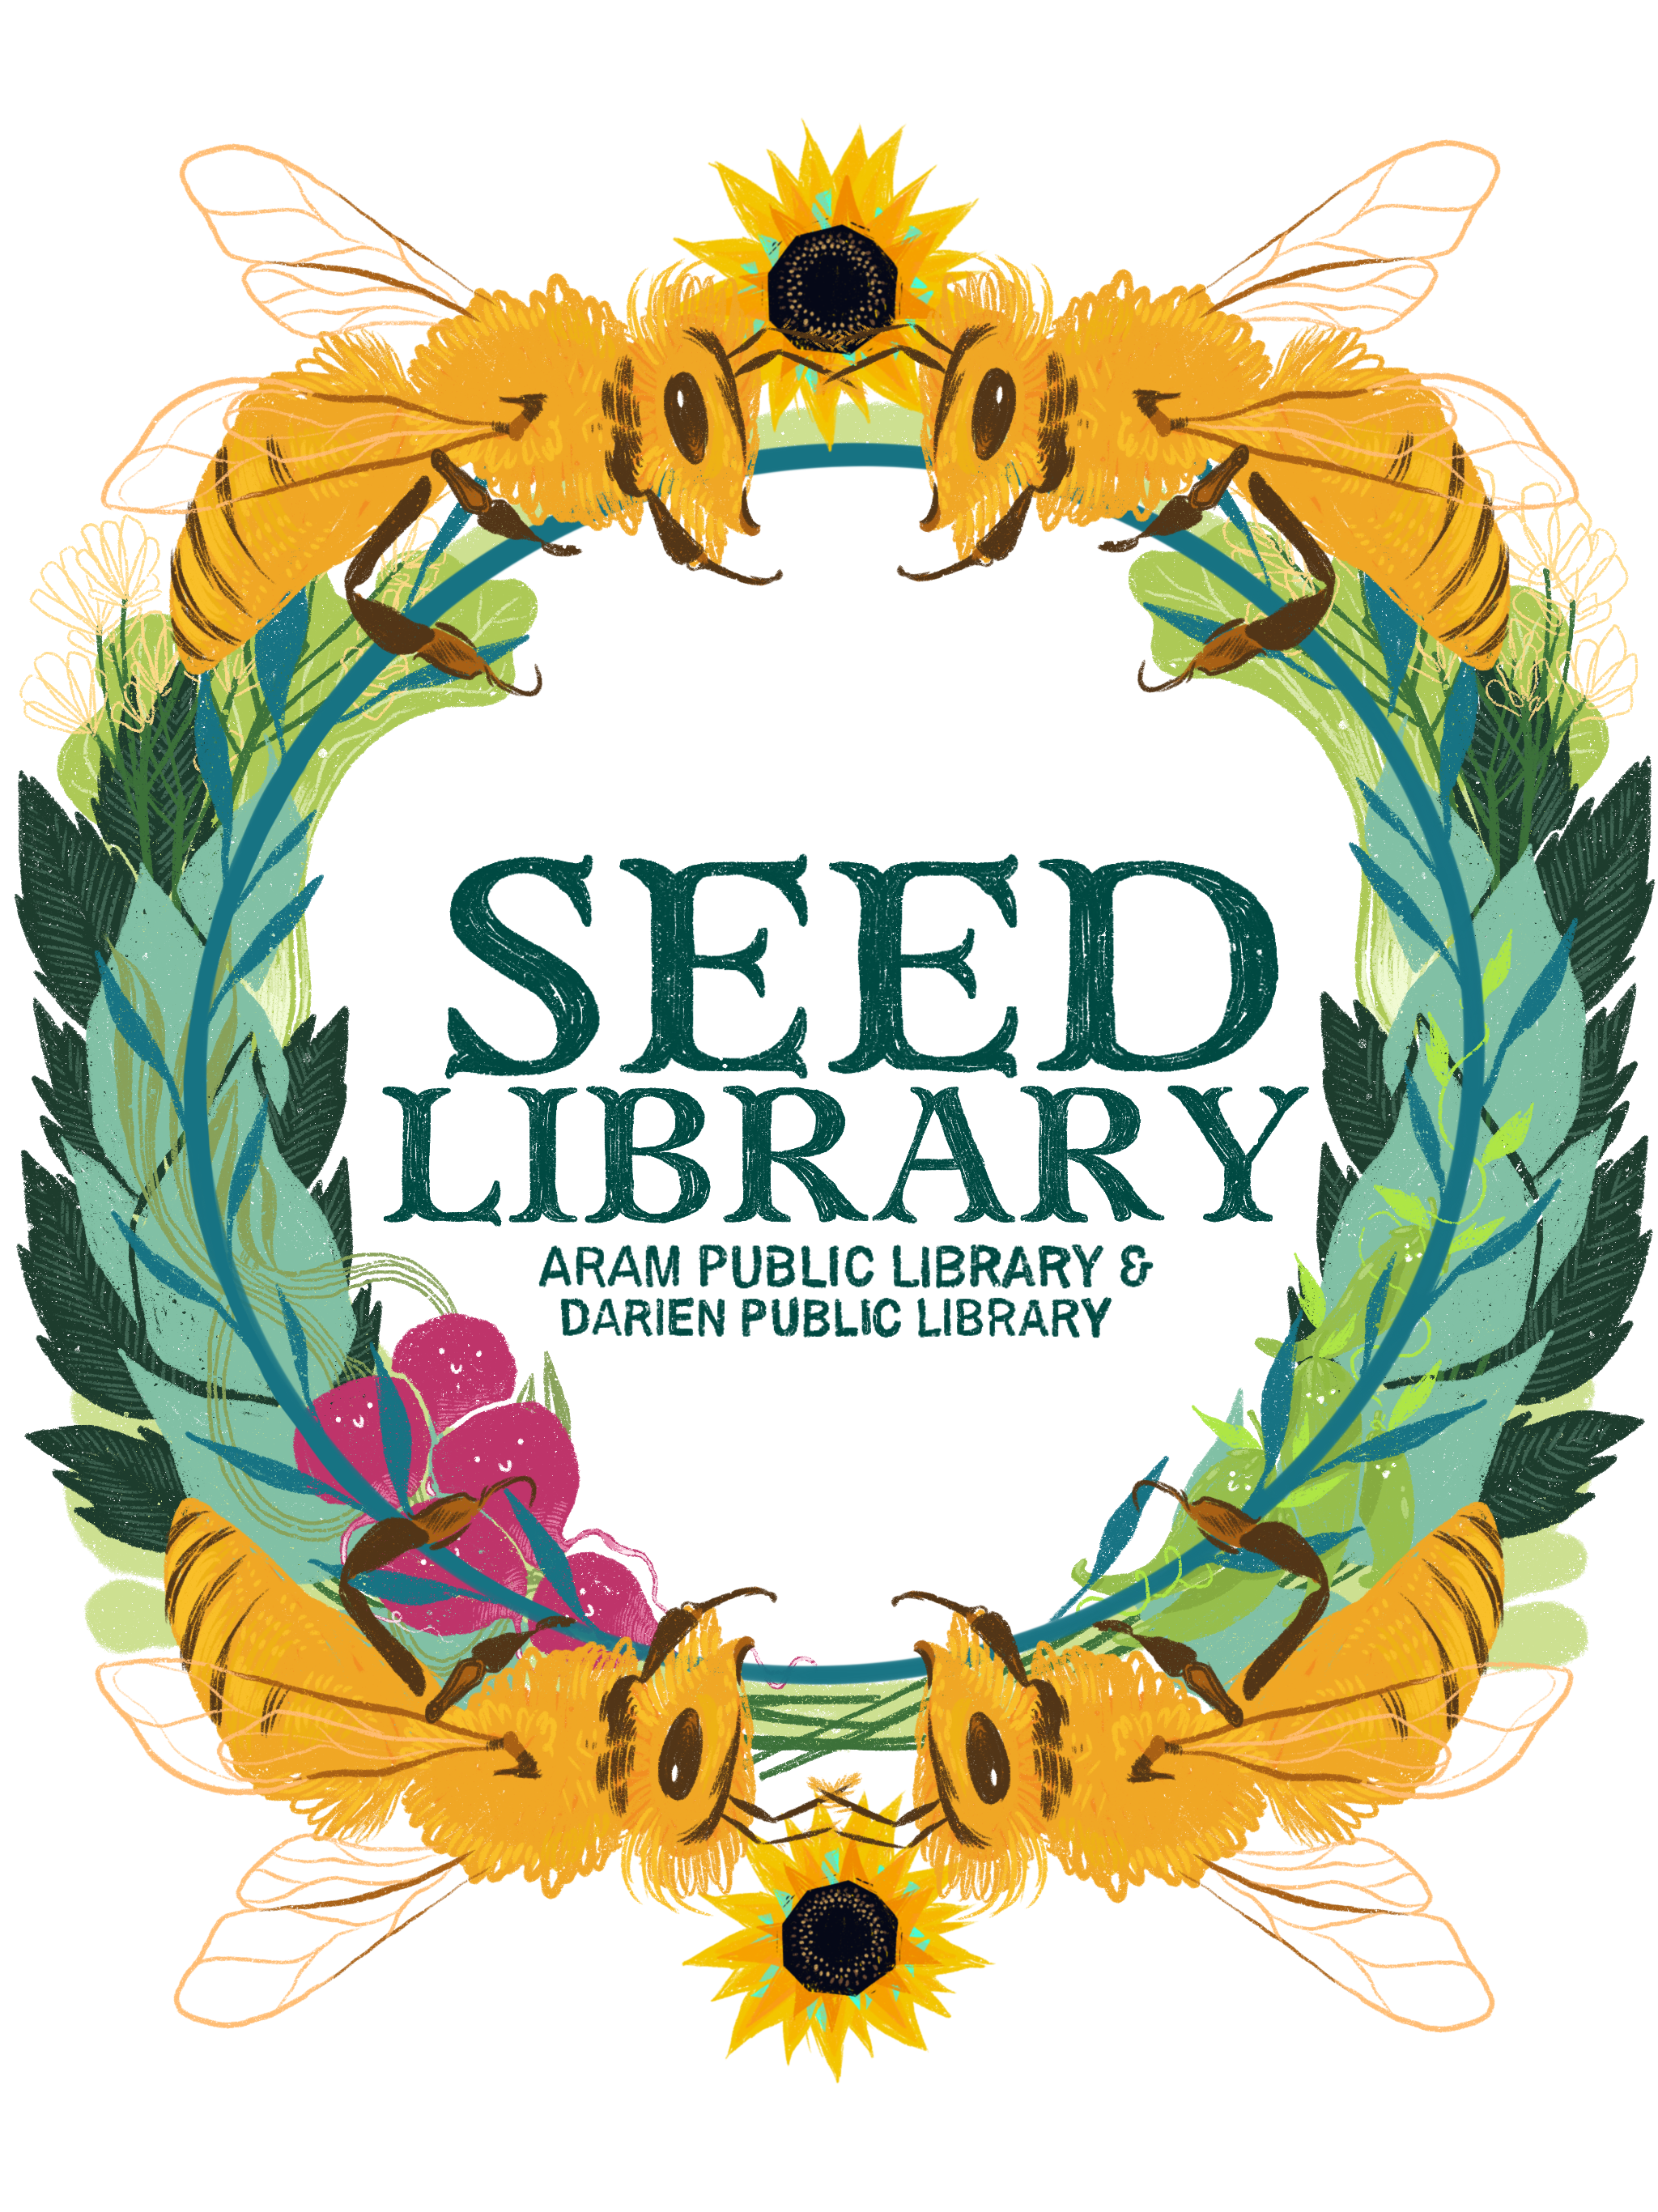 An illustrated wreath of green foliage, red berries, and yellow bees encircle the words, "Seed Library. Aram Public Library & Darien Public Library."